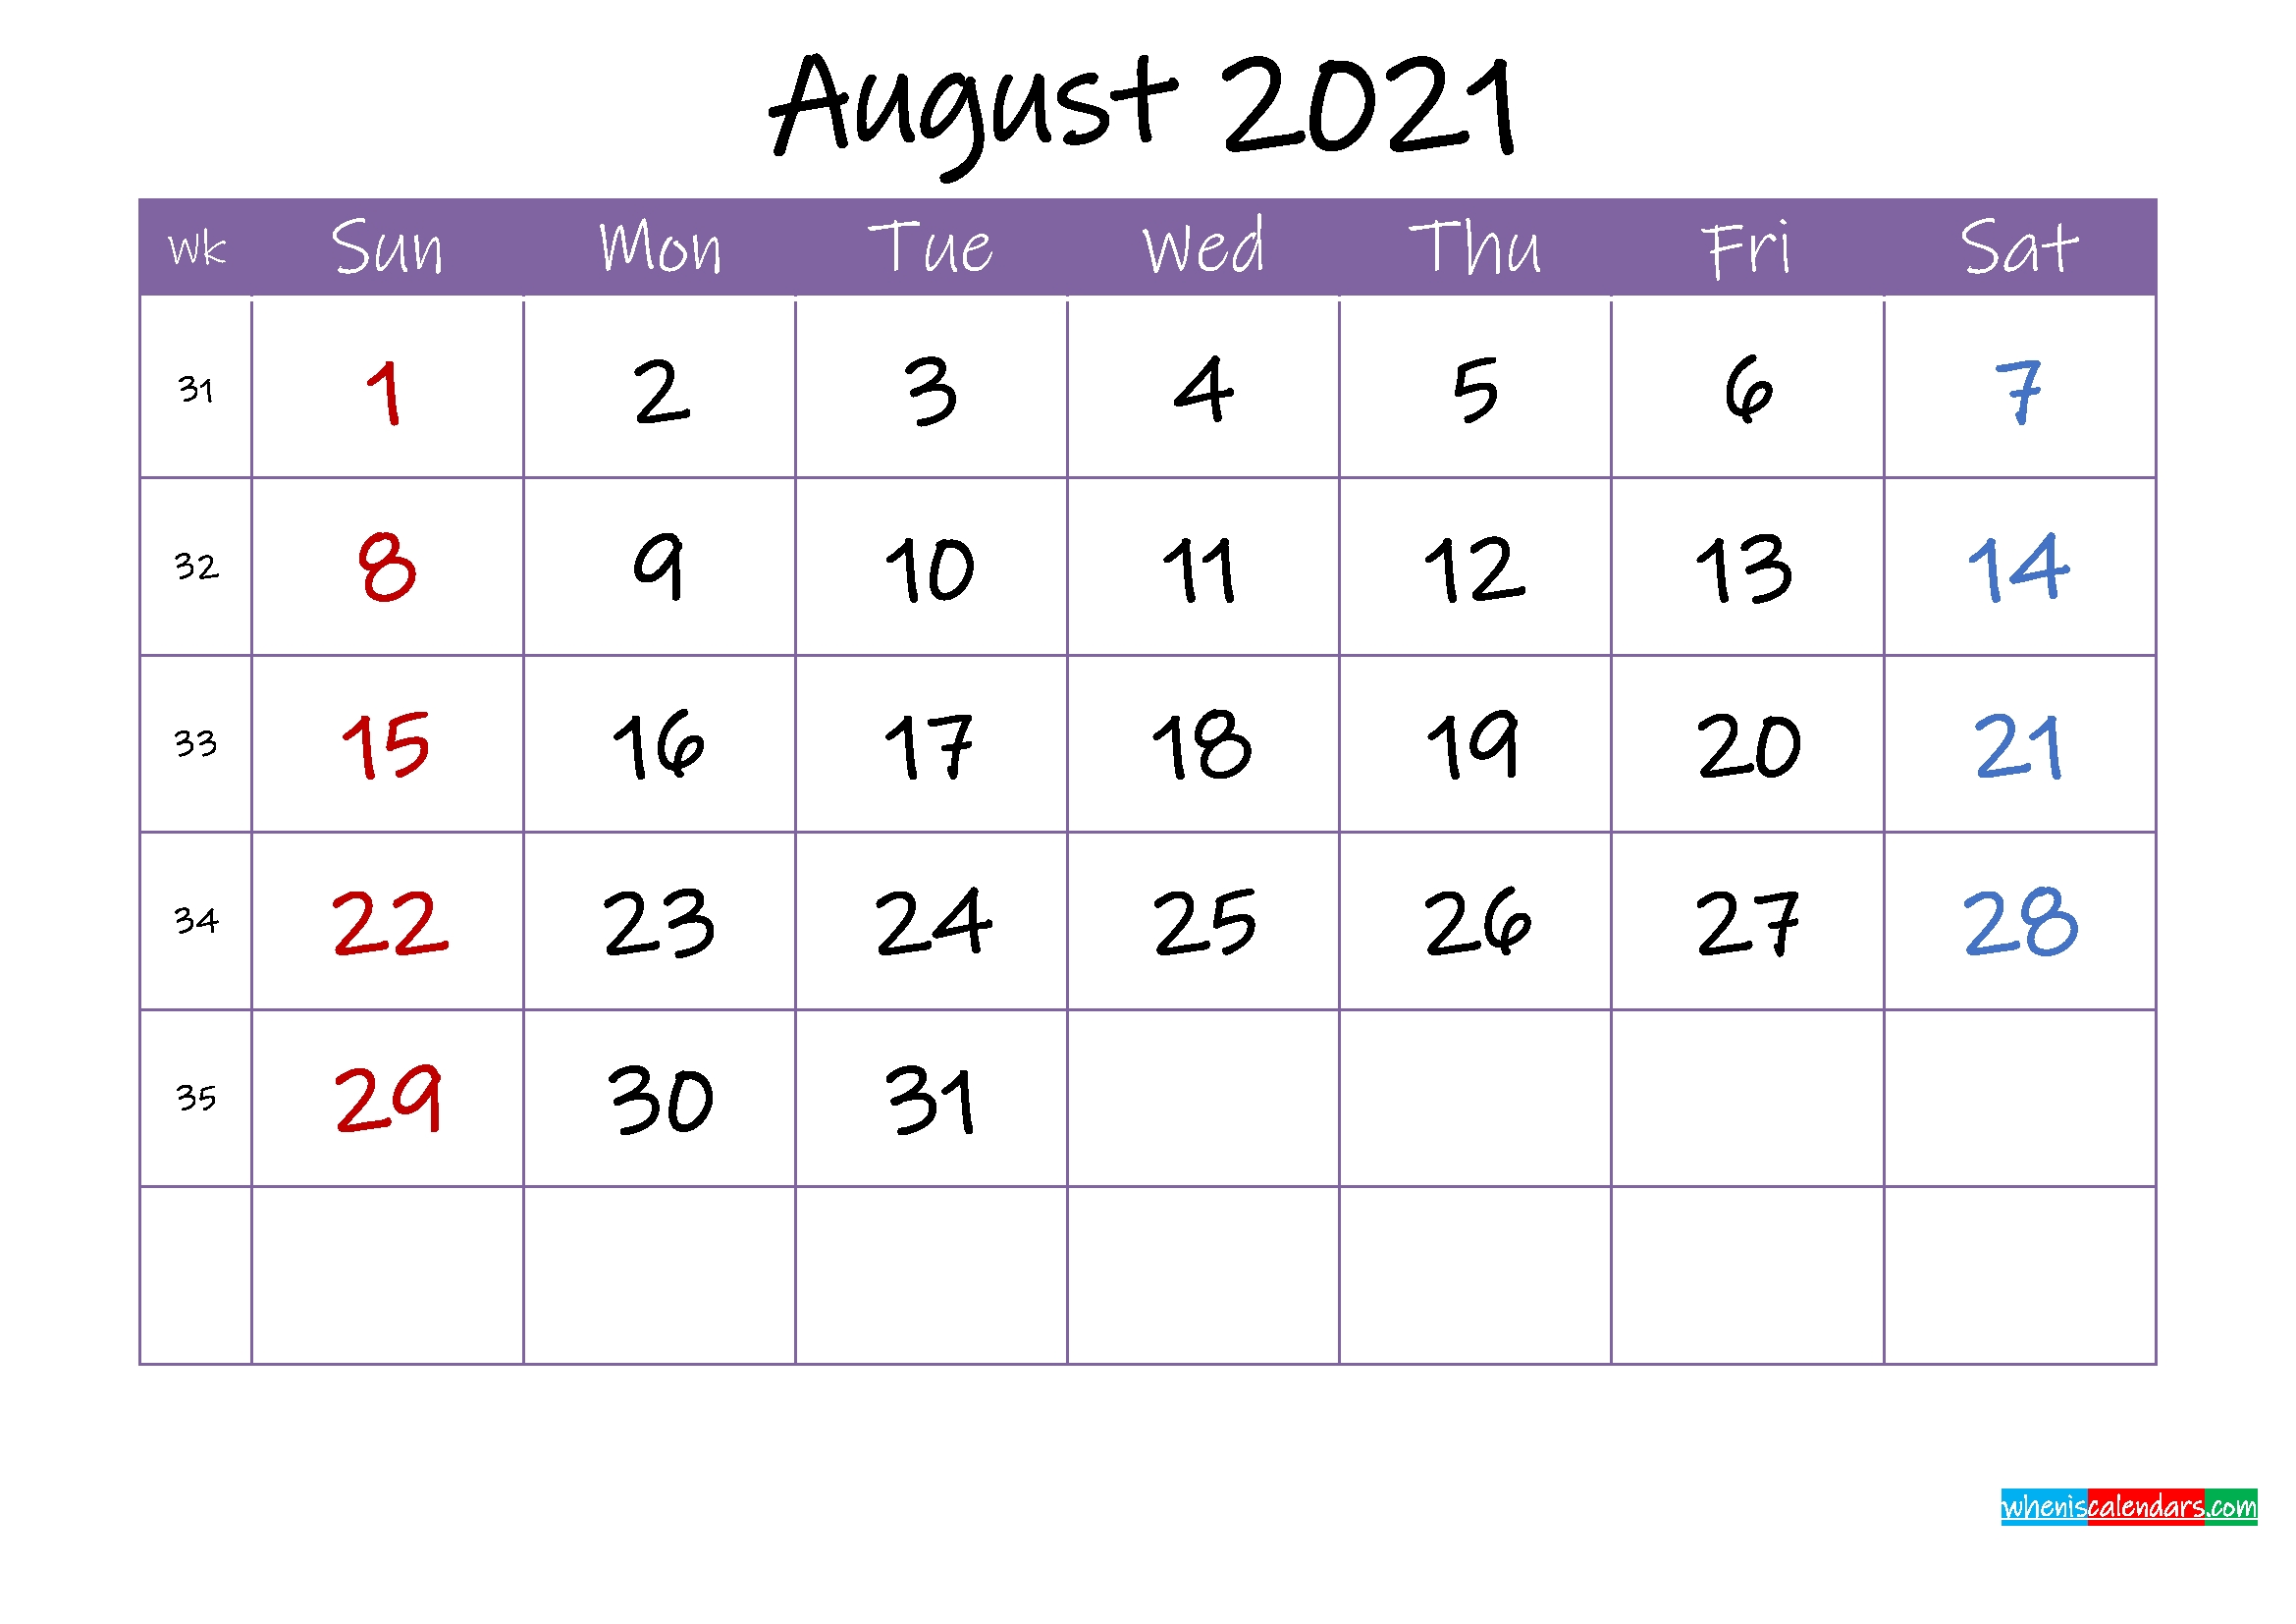 August 2021 Calendar With Holidays Printable - Template Ink21M56 August 2021 Calendar Month